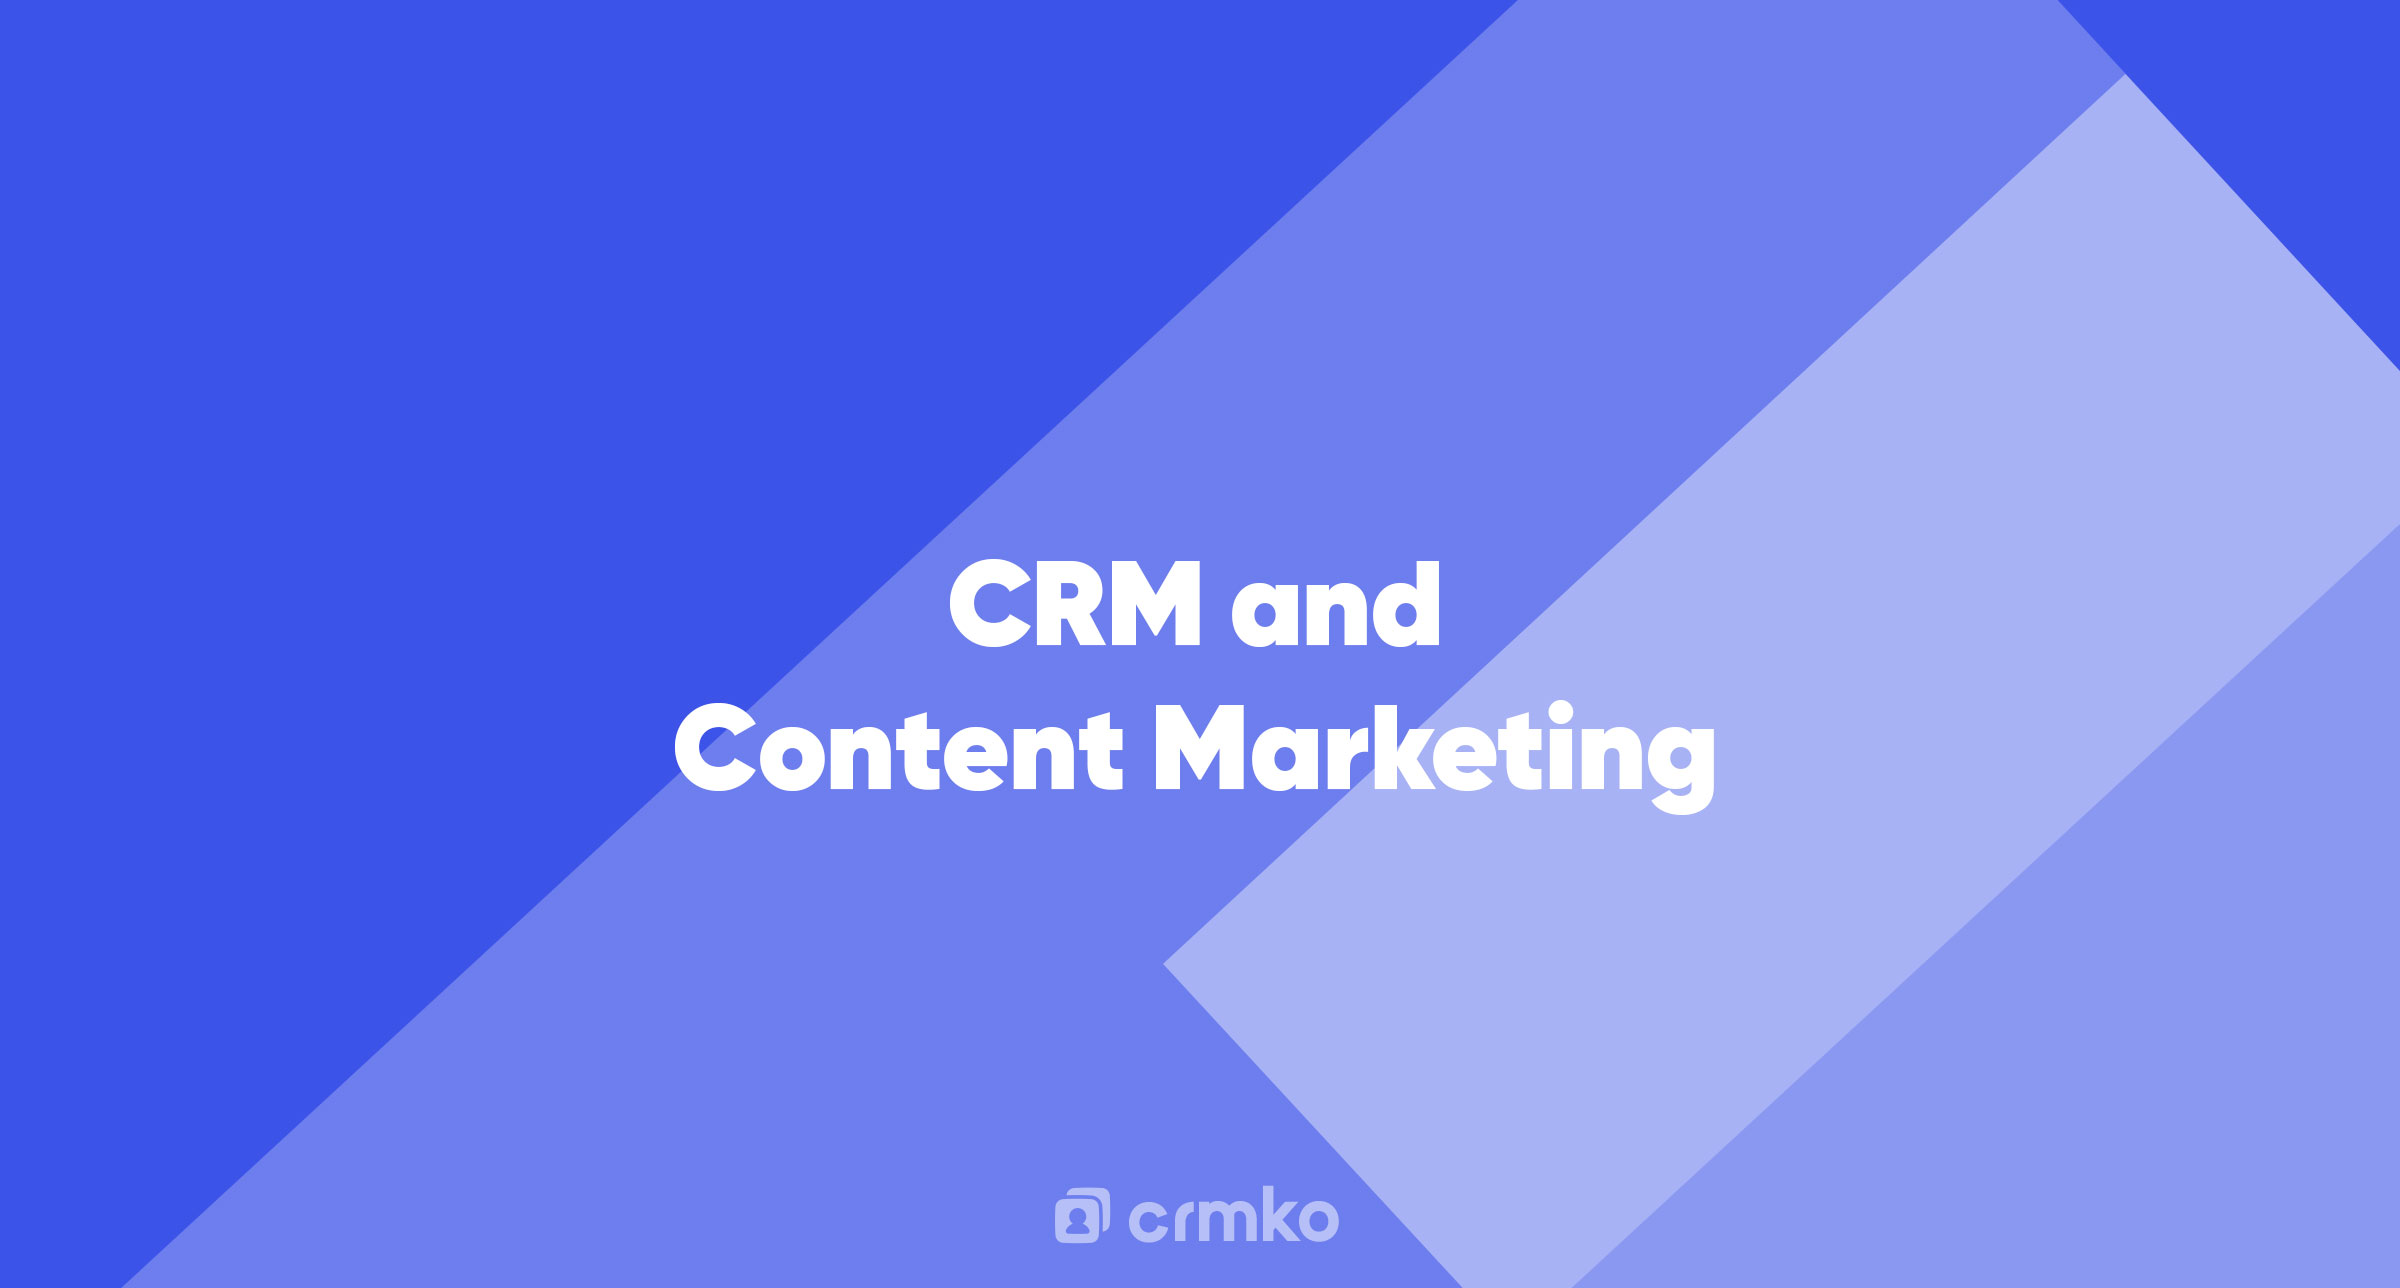 Article | CRM and Content Marketing